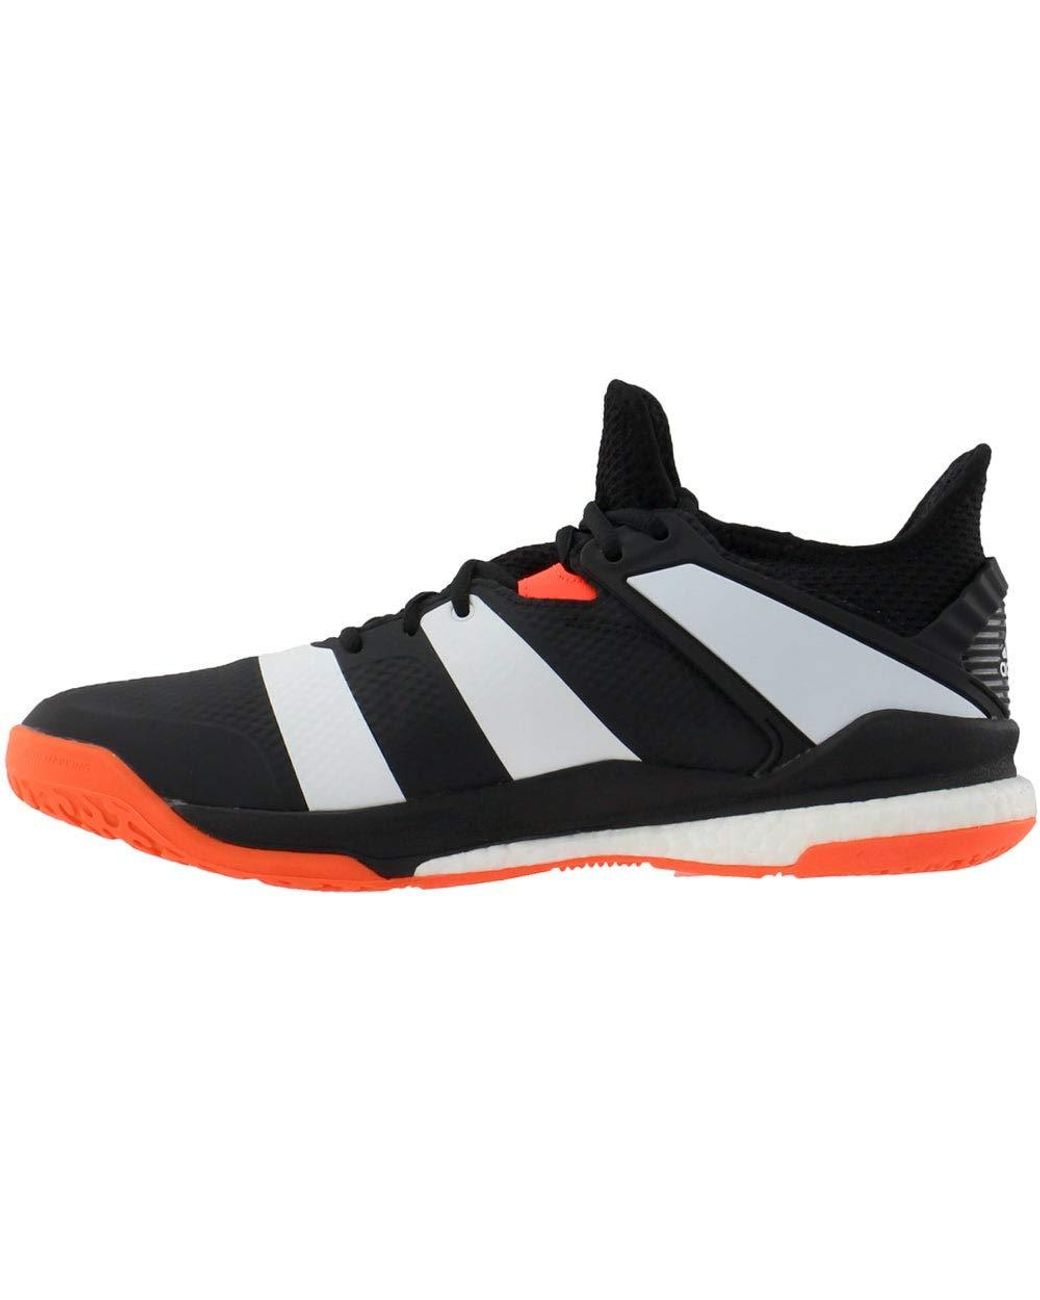 adidas Rubber Stabil X Handball Shoes in Orange (Black) for Men - Save 25%  | Lyst